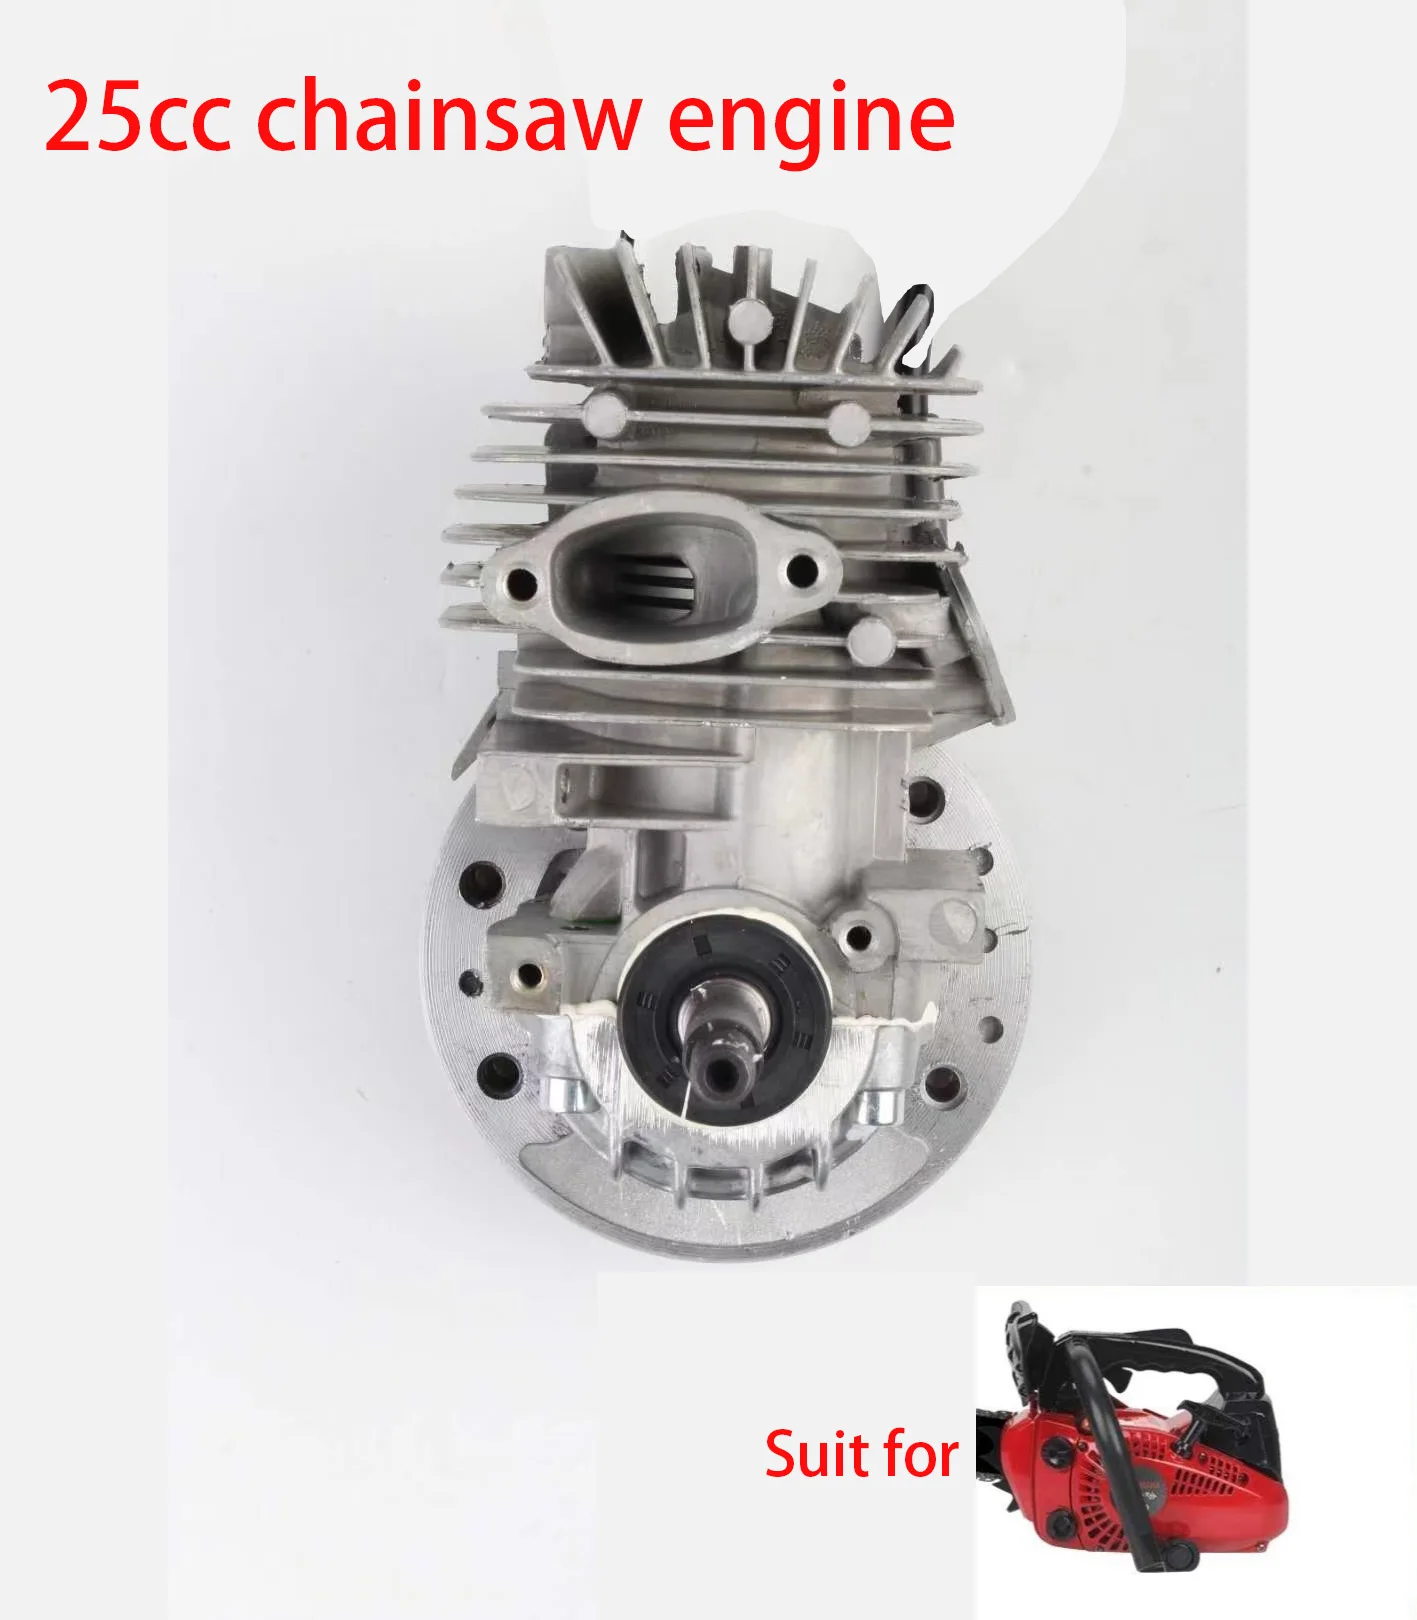 Whole Complete Engine Motor Cylinder Crankshaft Assembly For 25cc G2500 Top Handle Gasoline Chainsaw Pruner lusqi chainsaw recoil starter assembly fit stihl ms170 ms180 ms180c 017 018 chain saw gasoline engine starter repair part